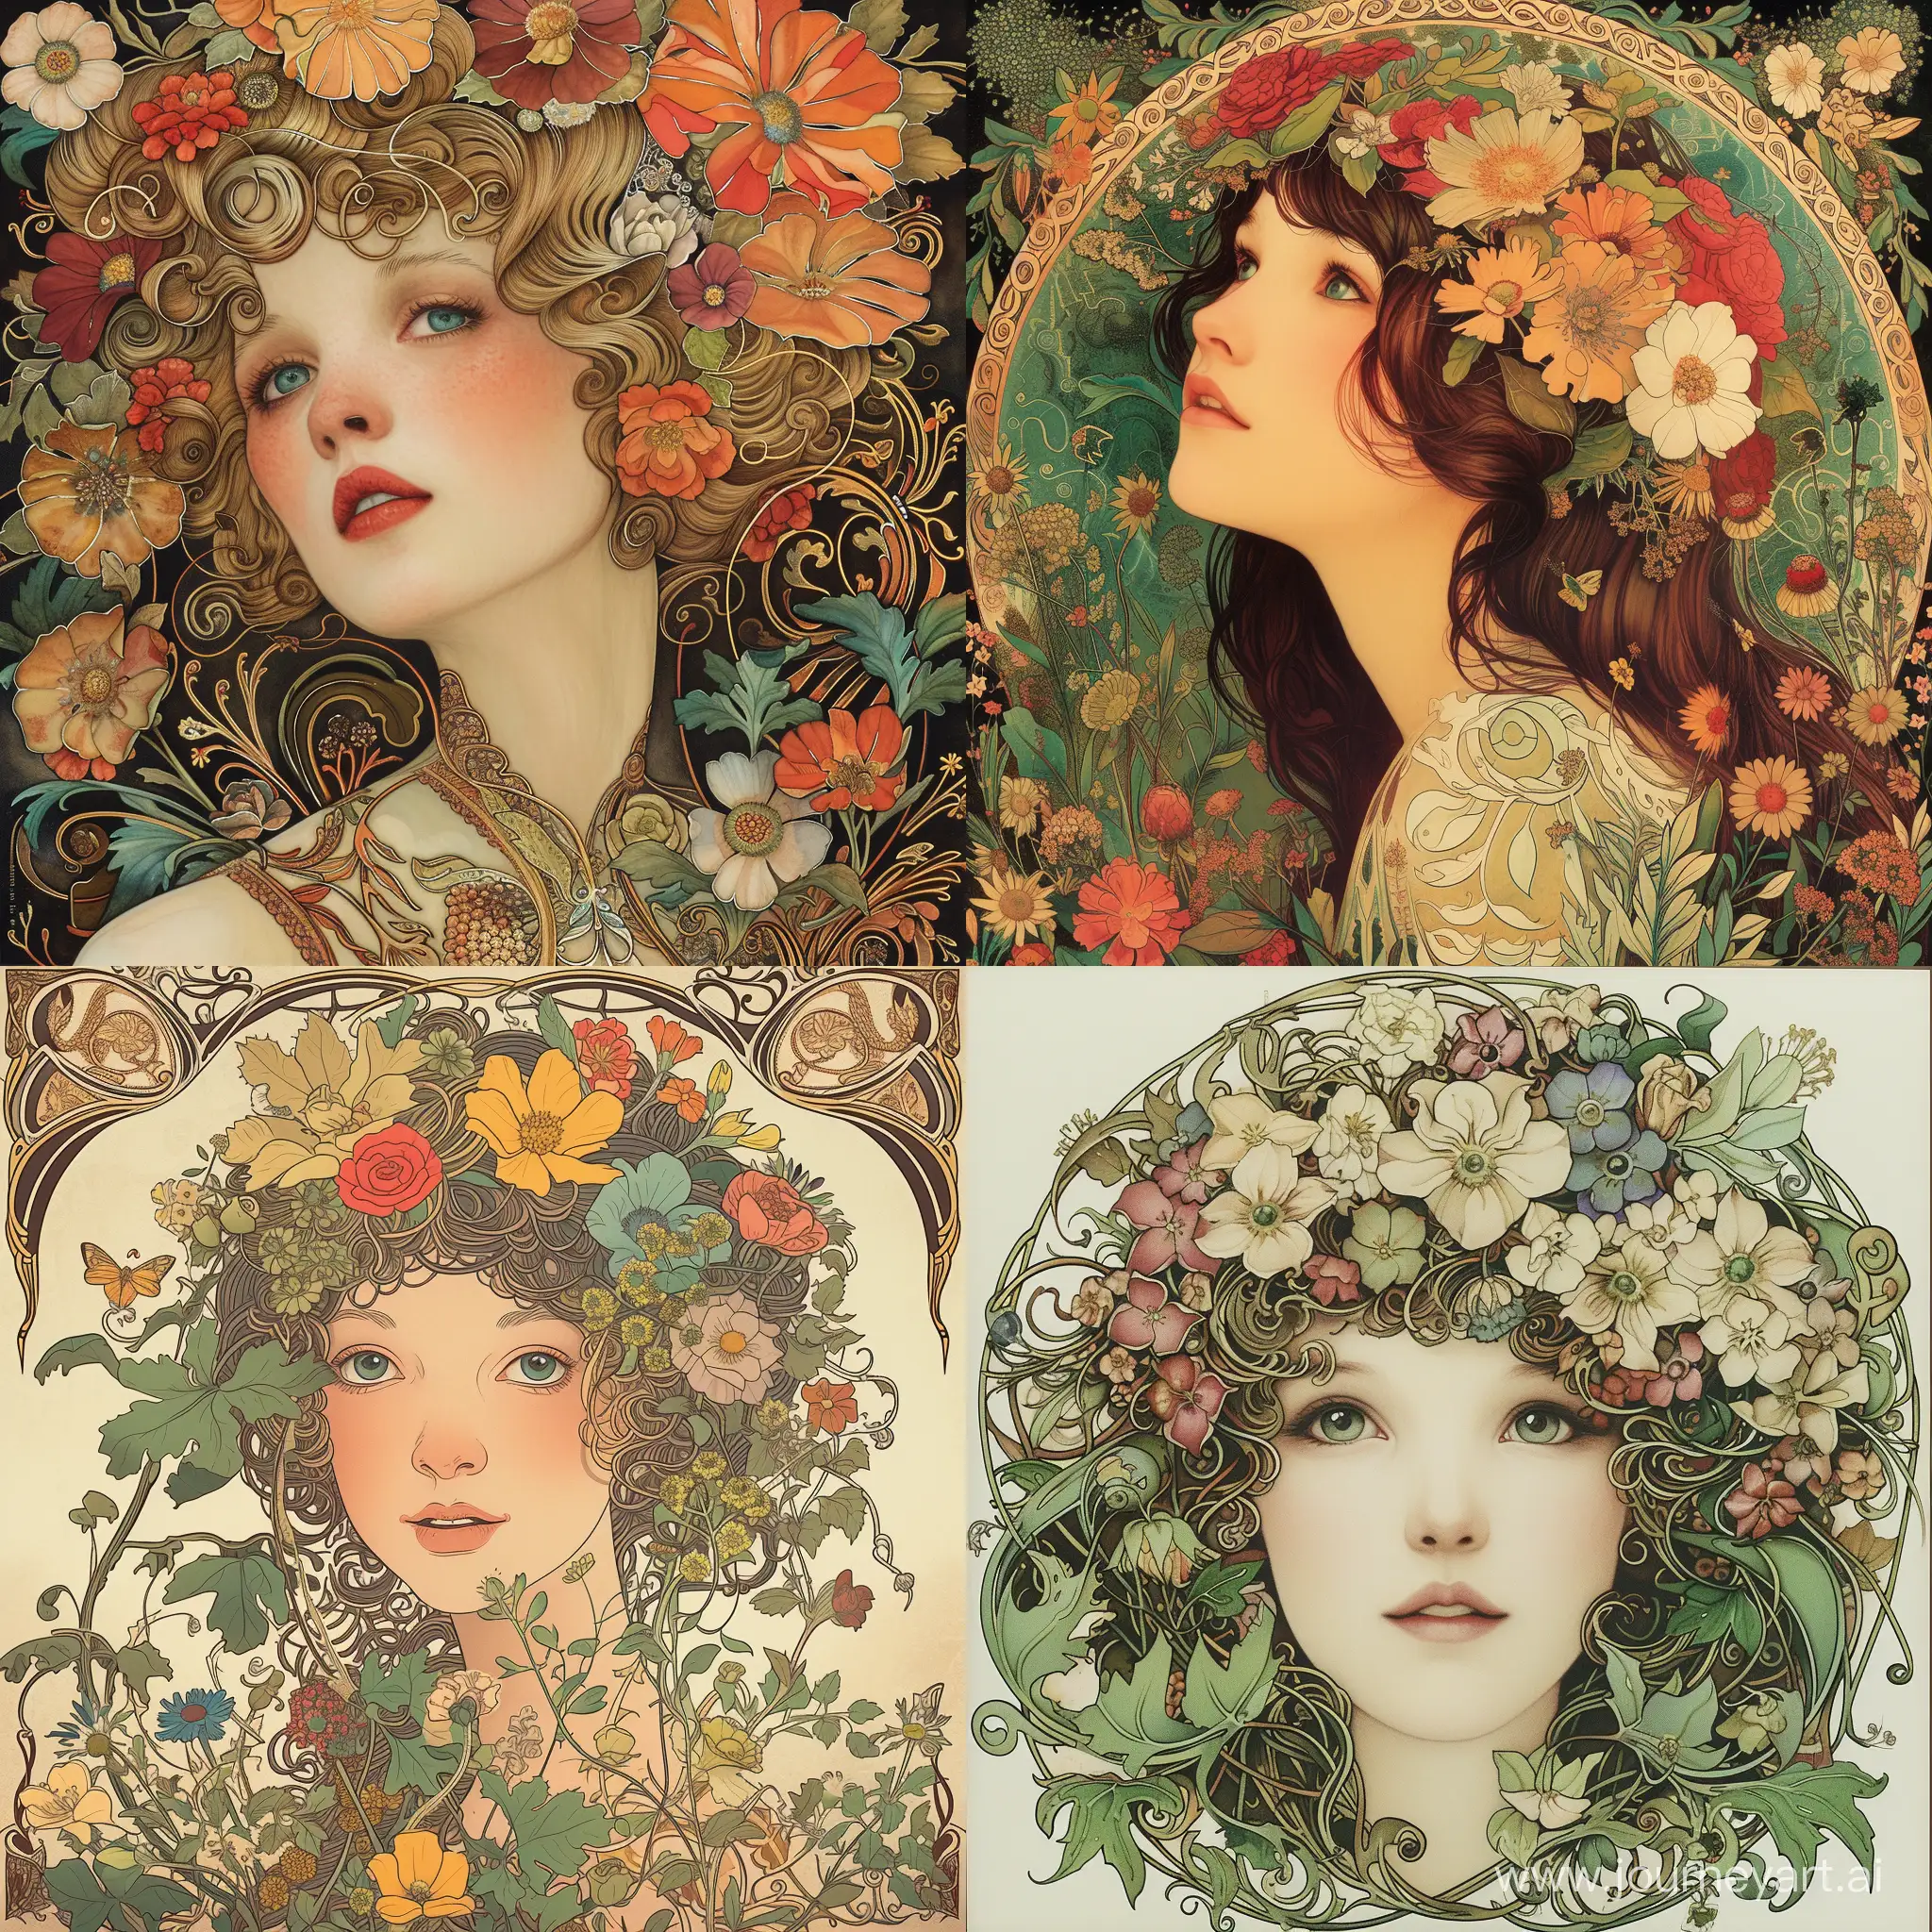 art nouveau persons with a lot of flowers and Motifs